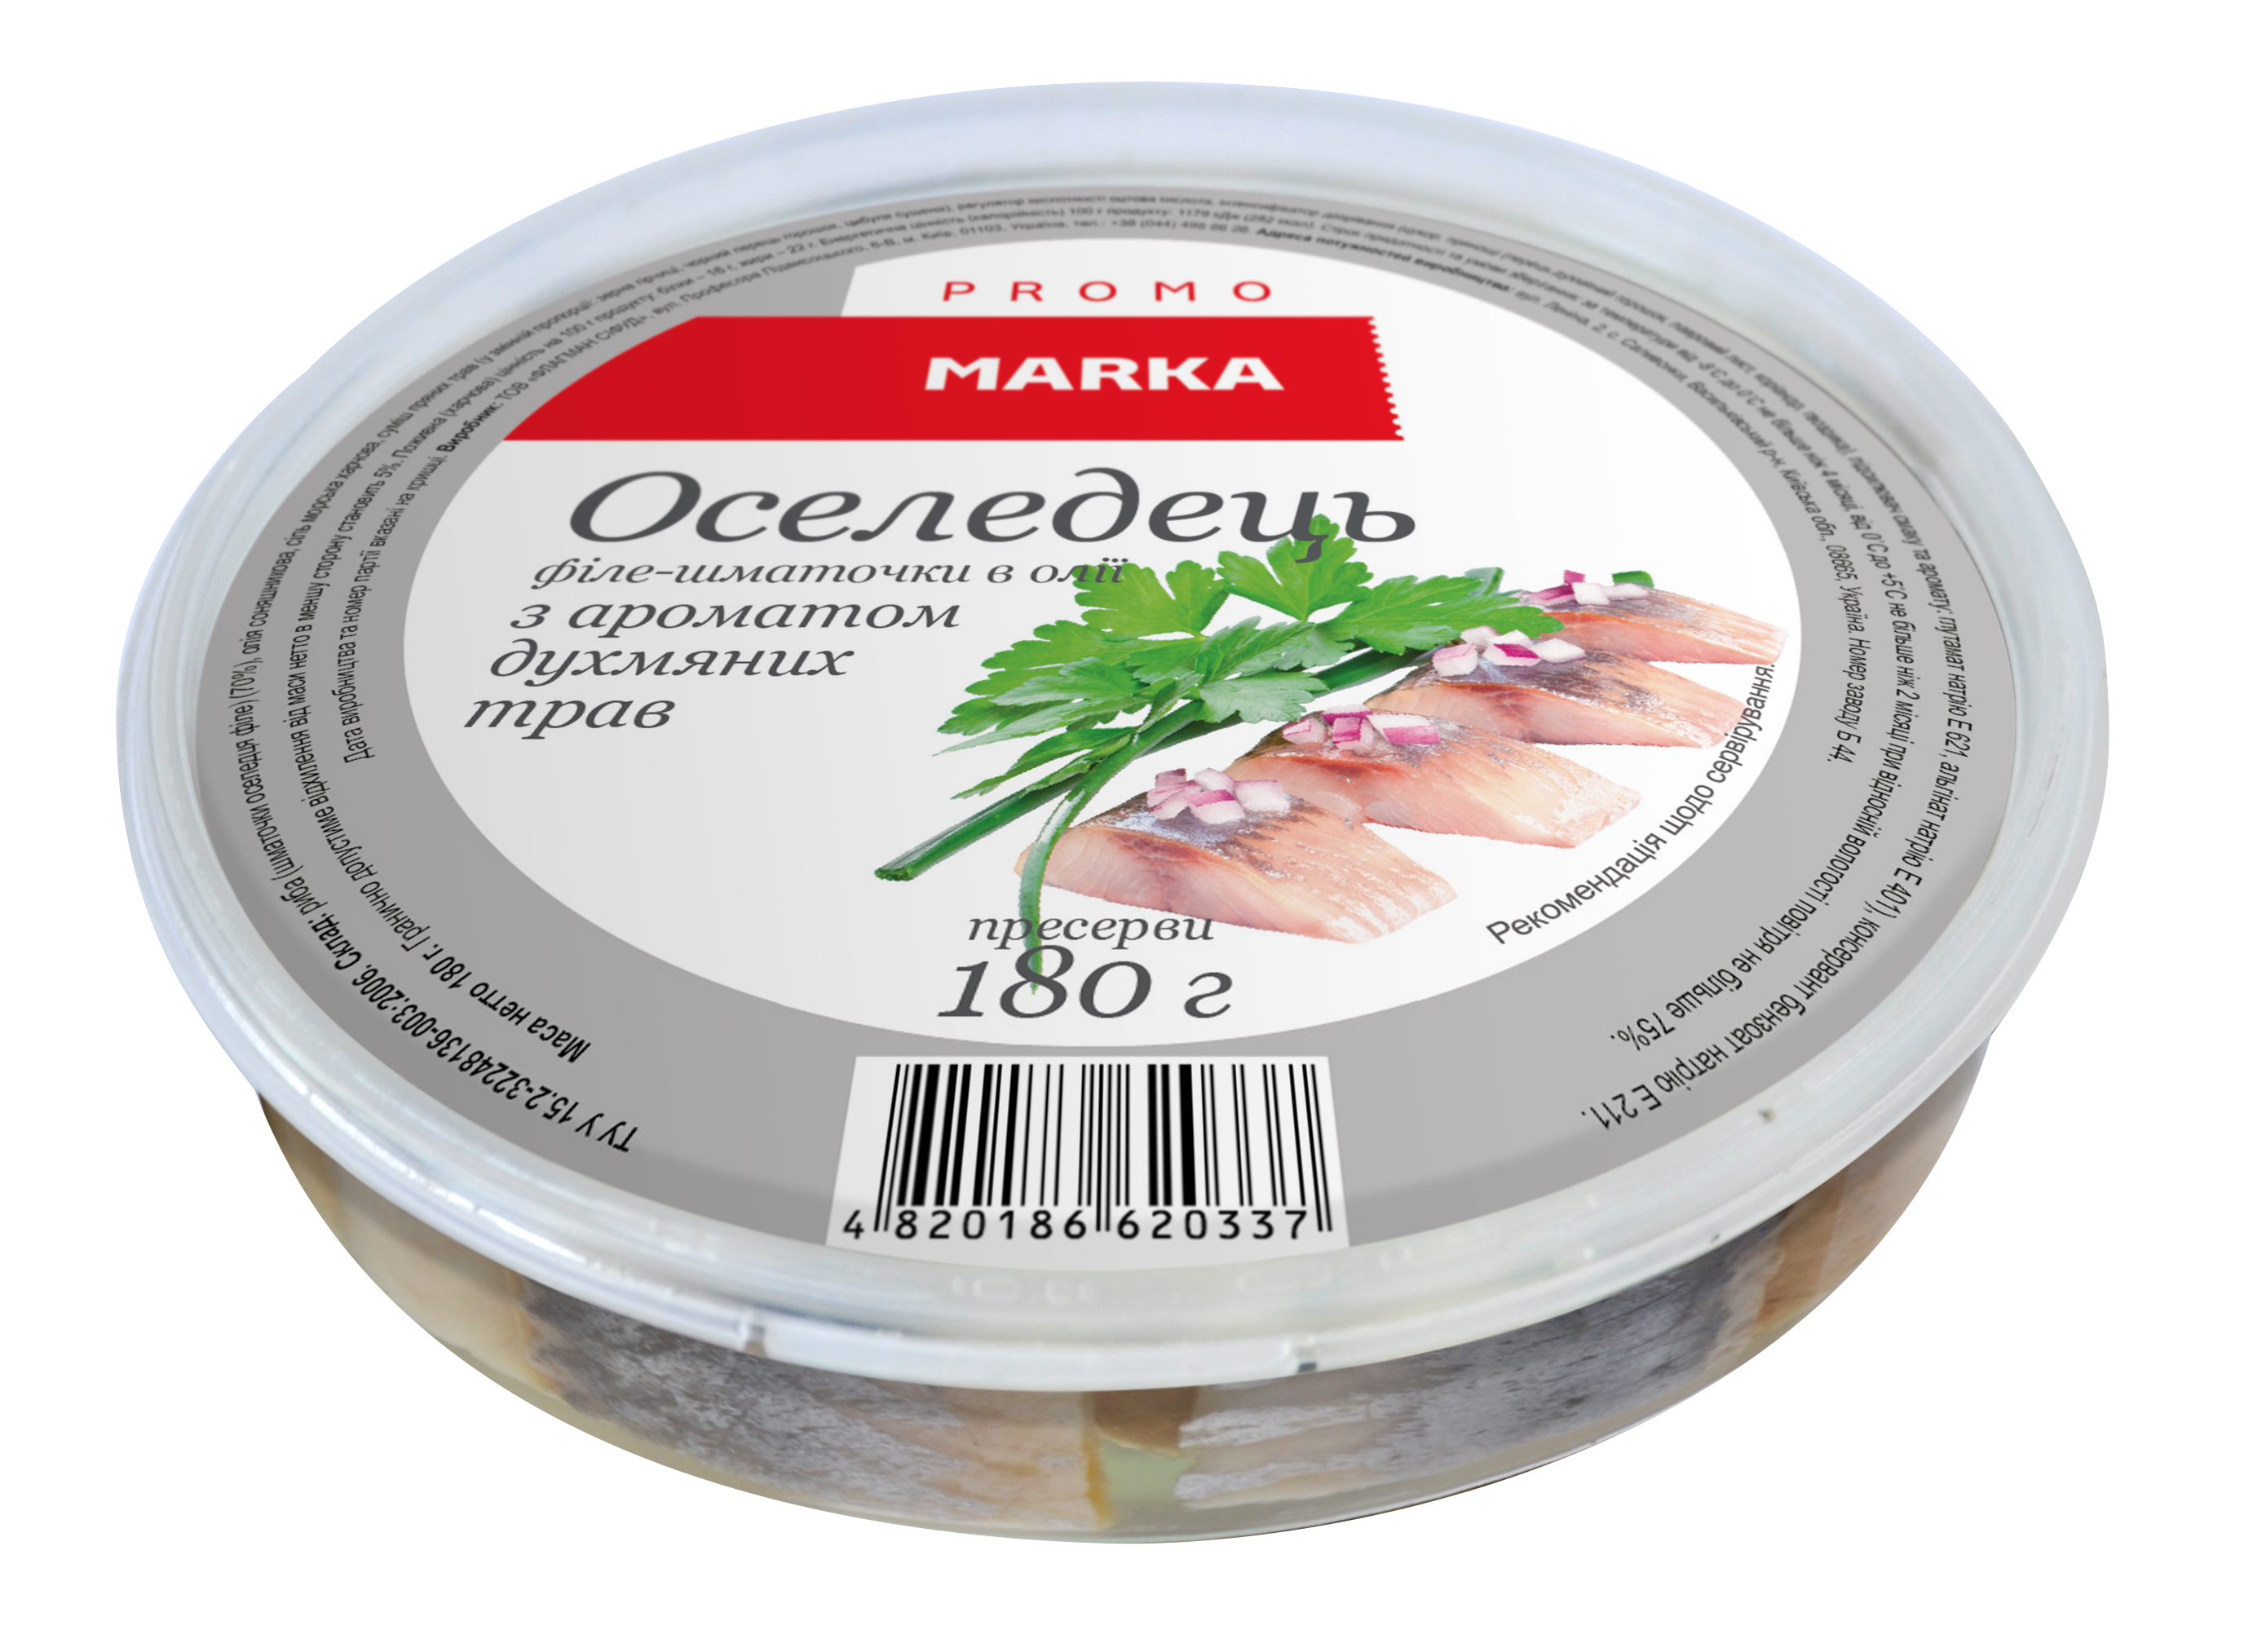 Marka Promo In Oil With Herbs Aroma Herring Fillet Pieces 180g